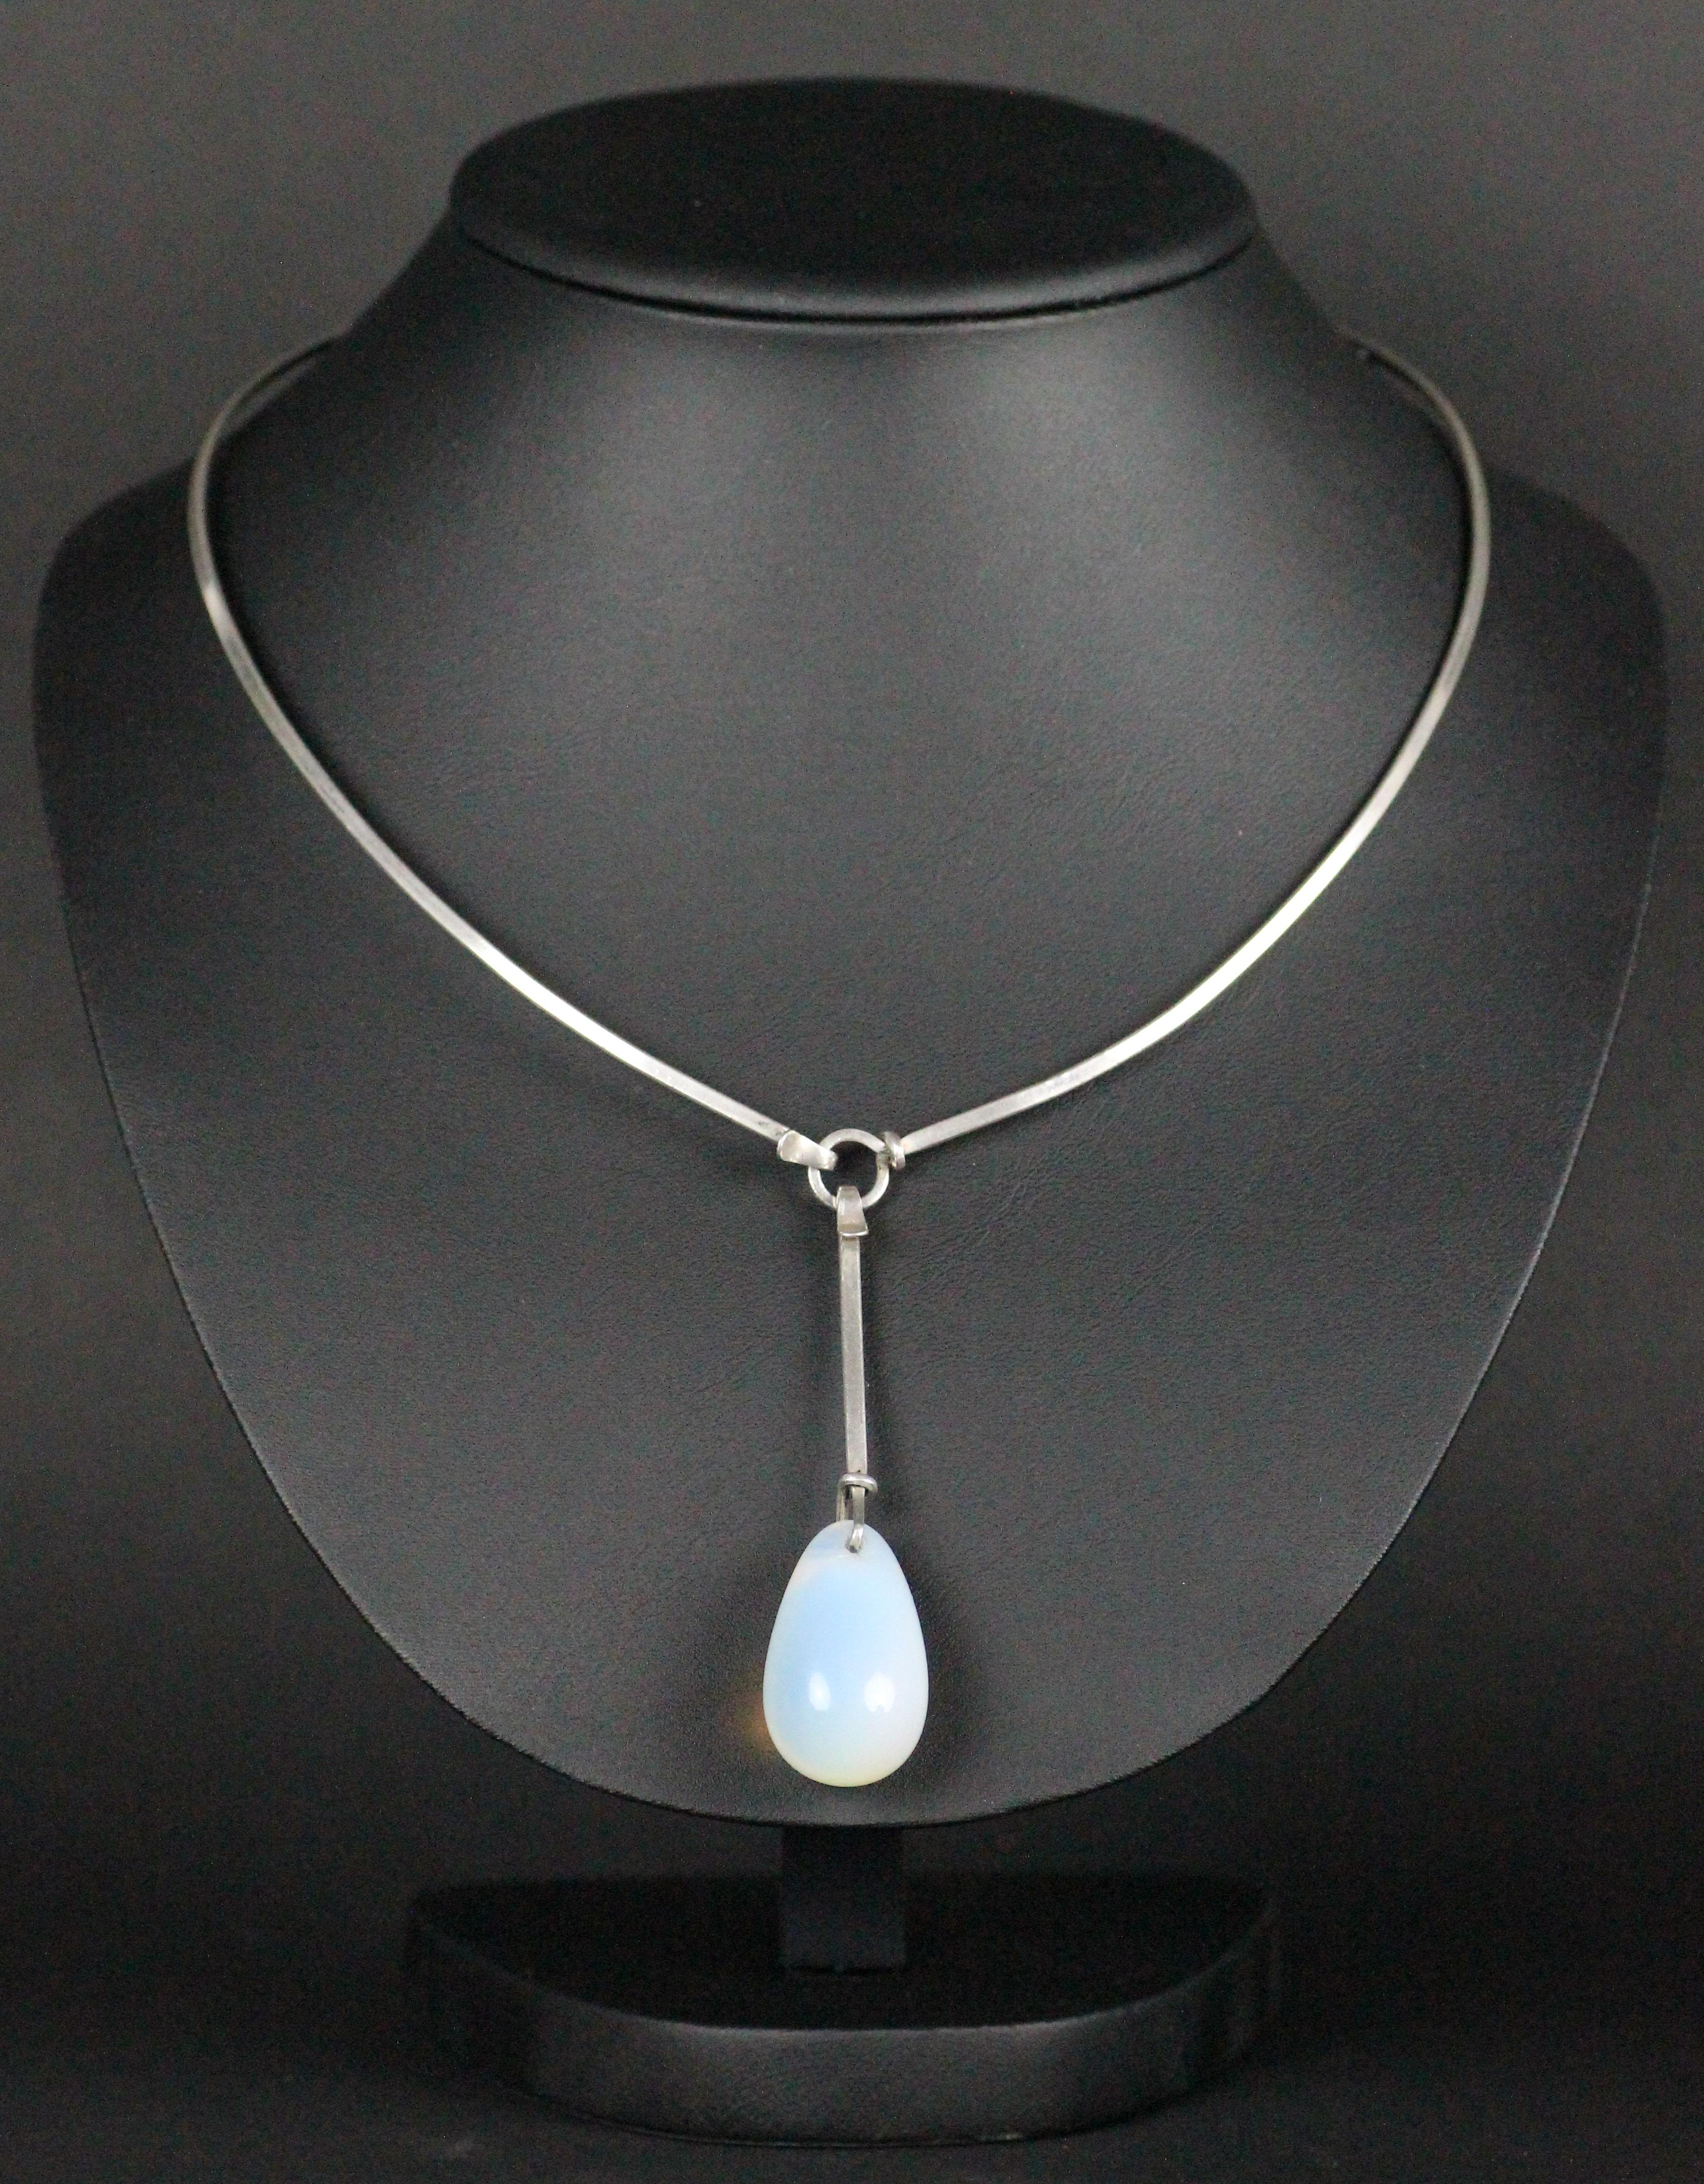 This necklace is made by her self in her own workshop way before she made these for Georg Jensen.  This was bought in France in 1955 so it is most certainly made in 1954-55. Made with silver and a moonstone drop pendant. Both parts are marked